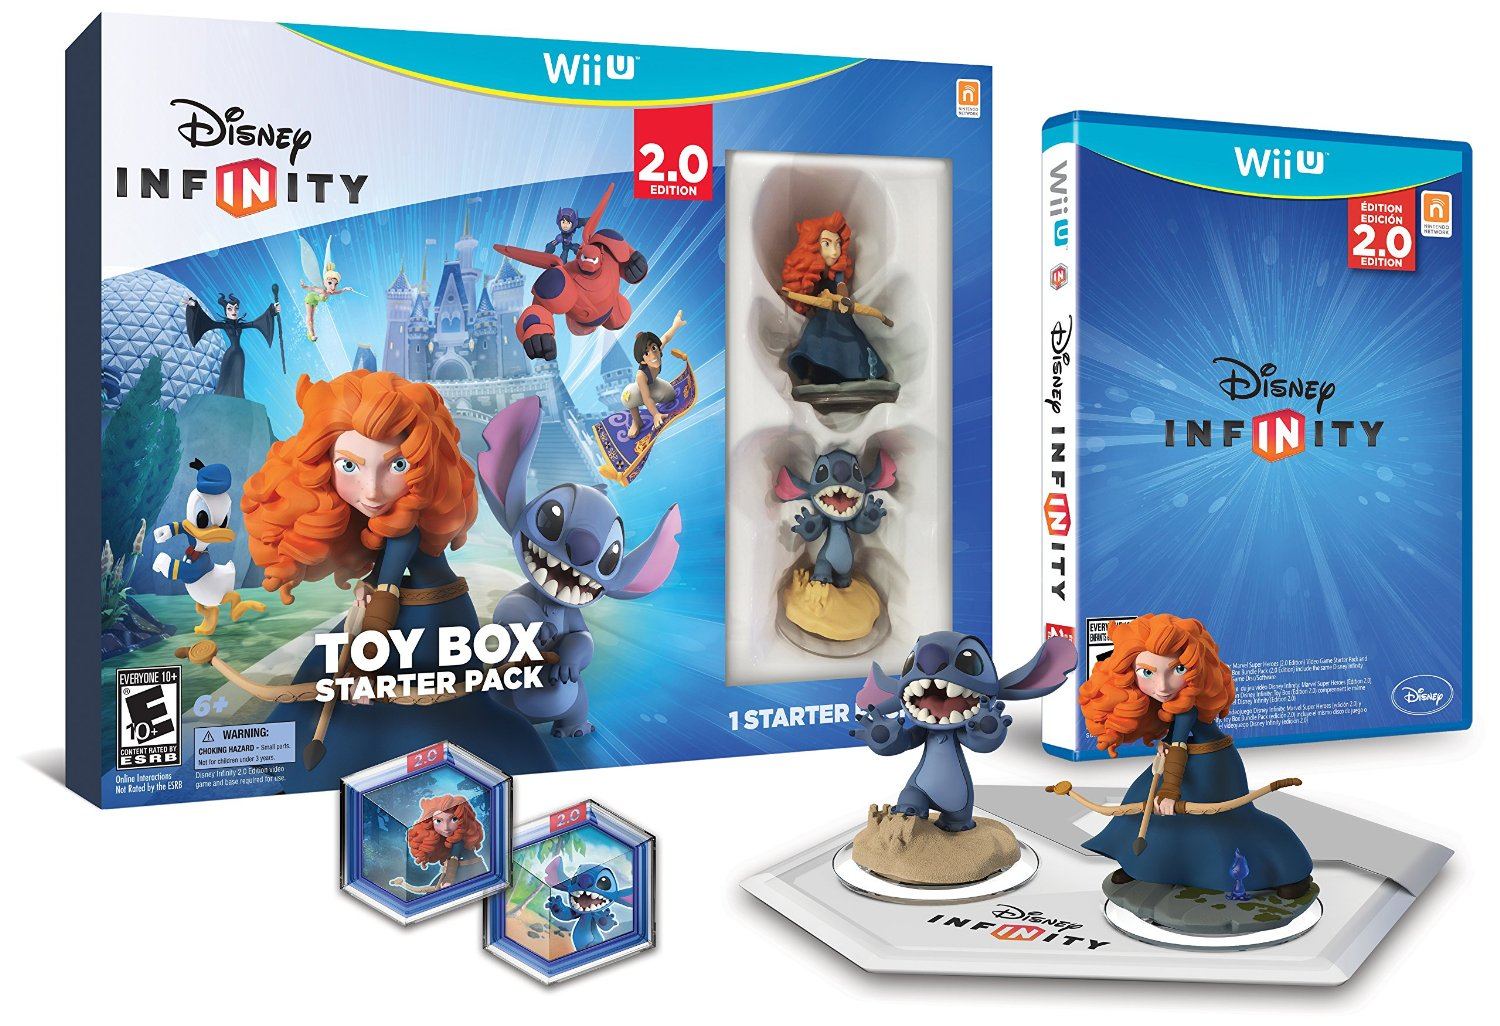 Disney Infinity Toy Box Starter Pack (2.0 Edition)